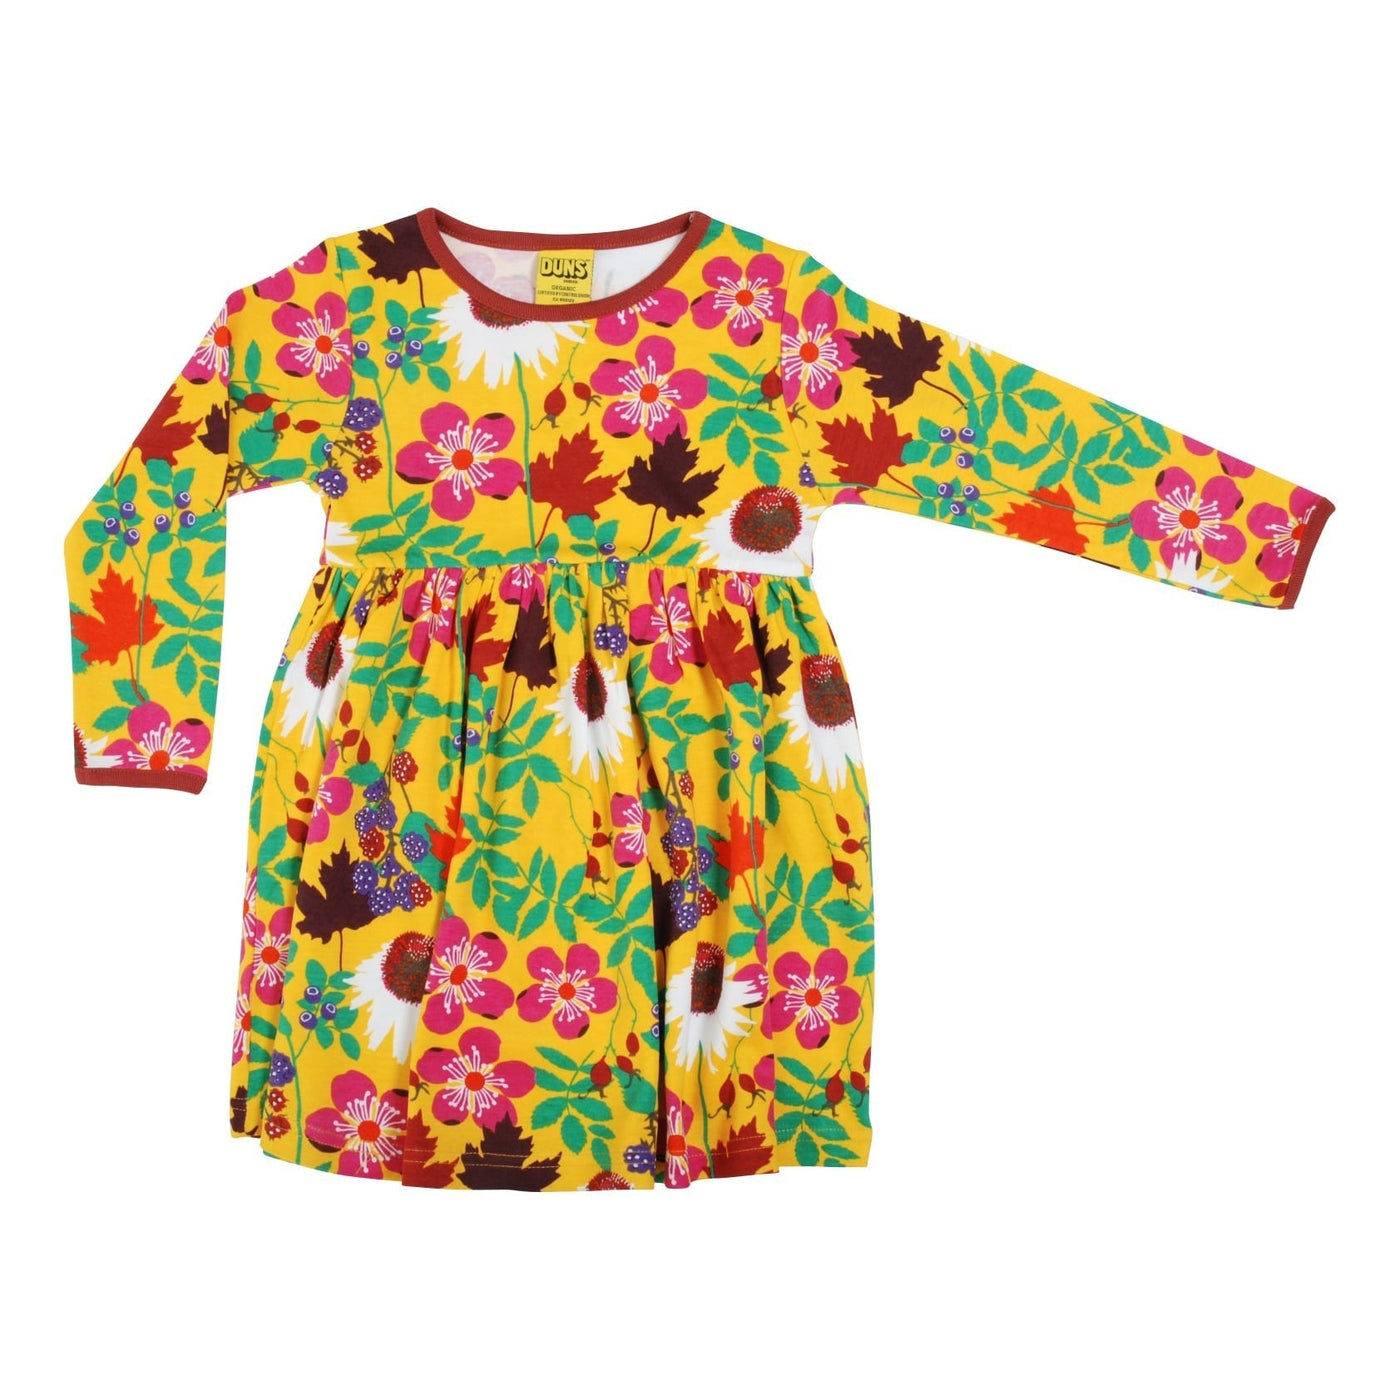 DUNS Long Sleeve Dress with Gather Skirt - Autumn Flowers Yellow